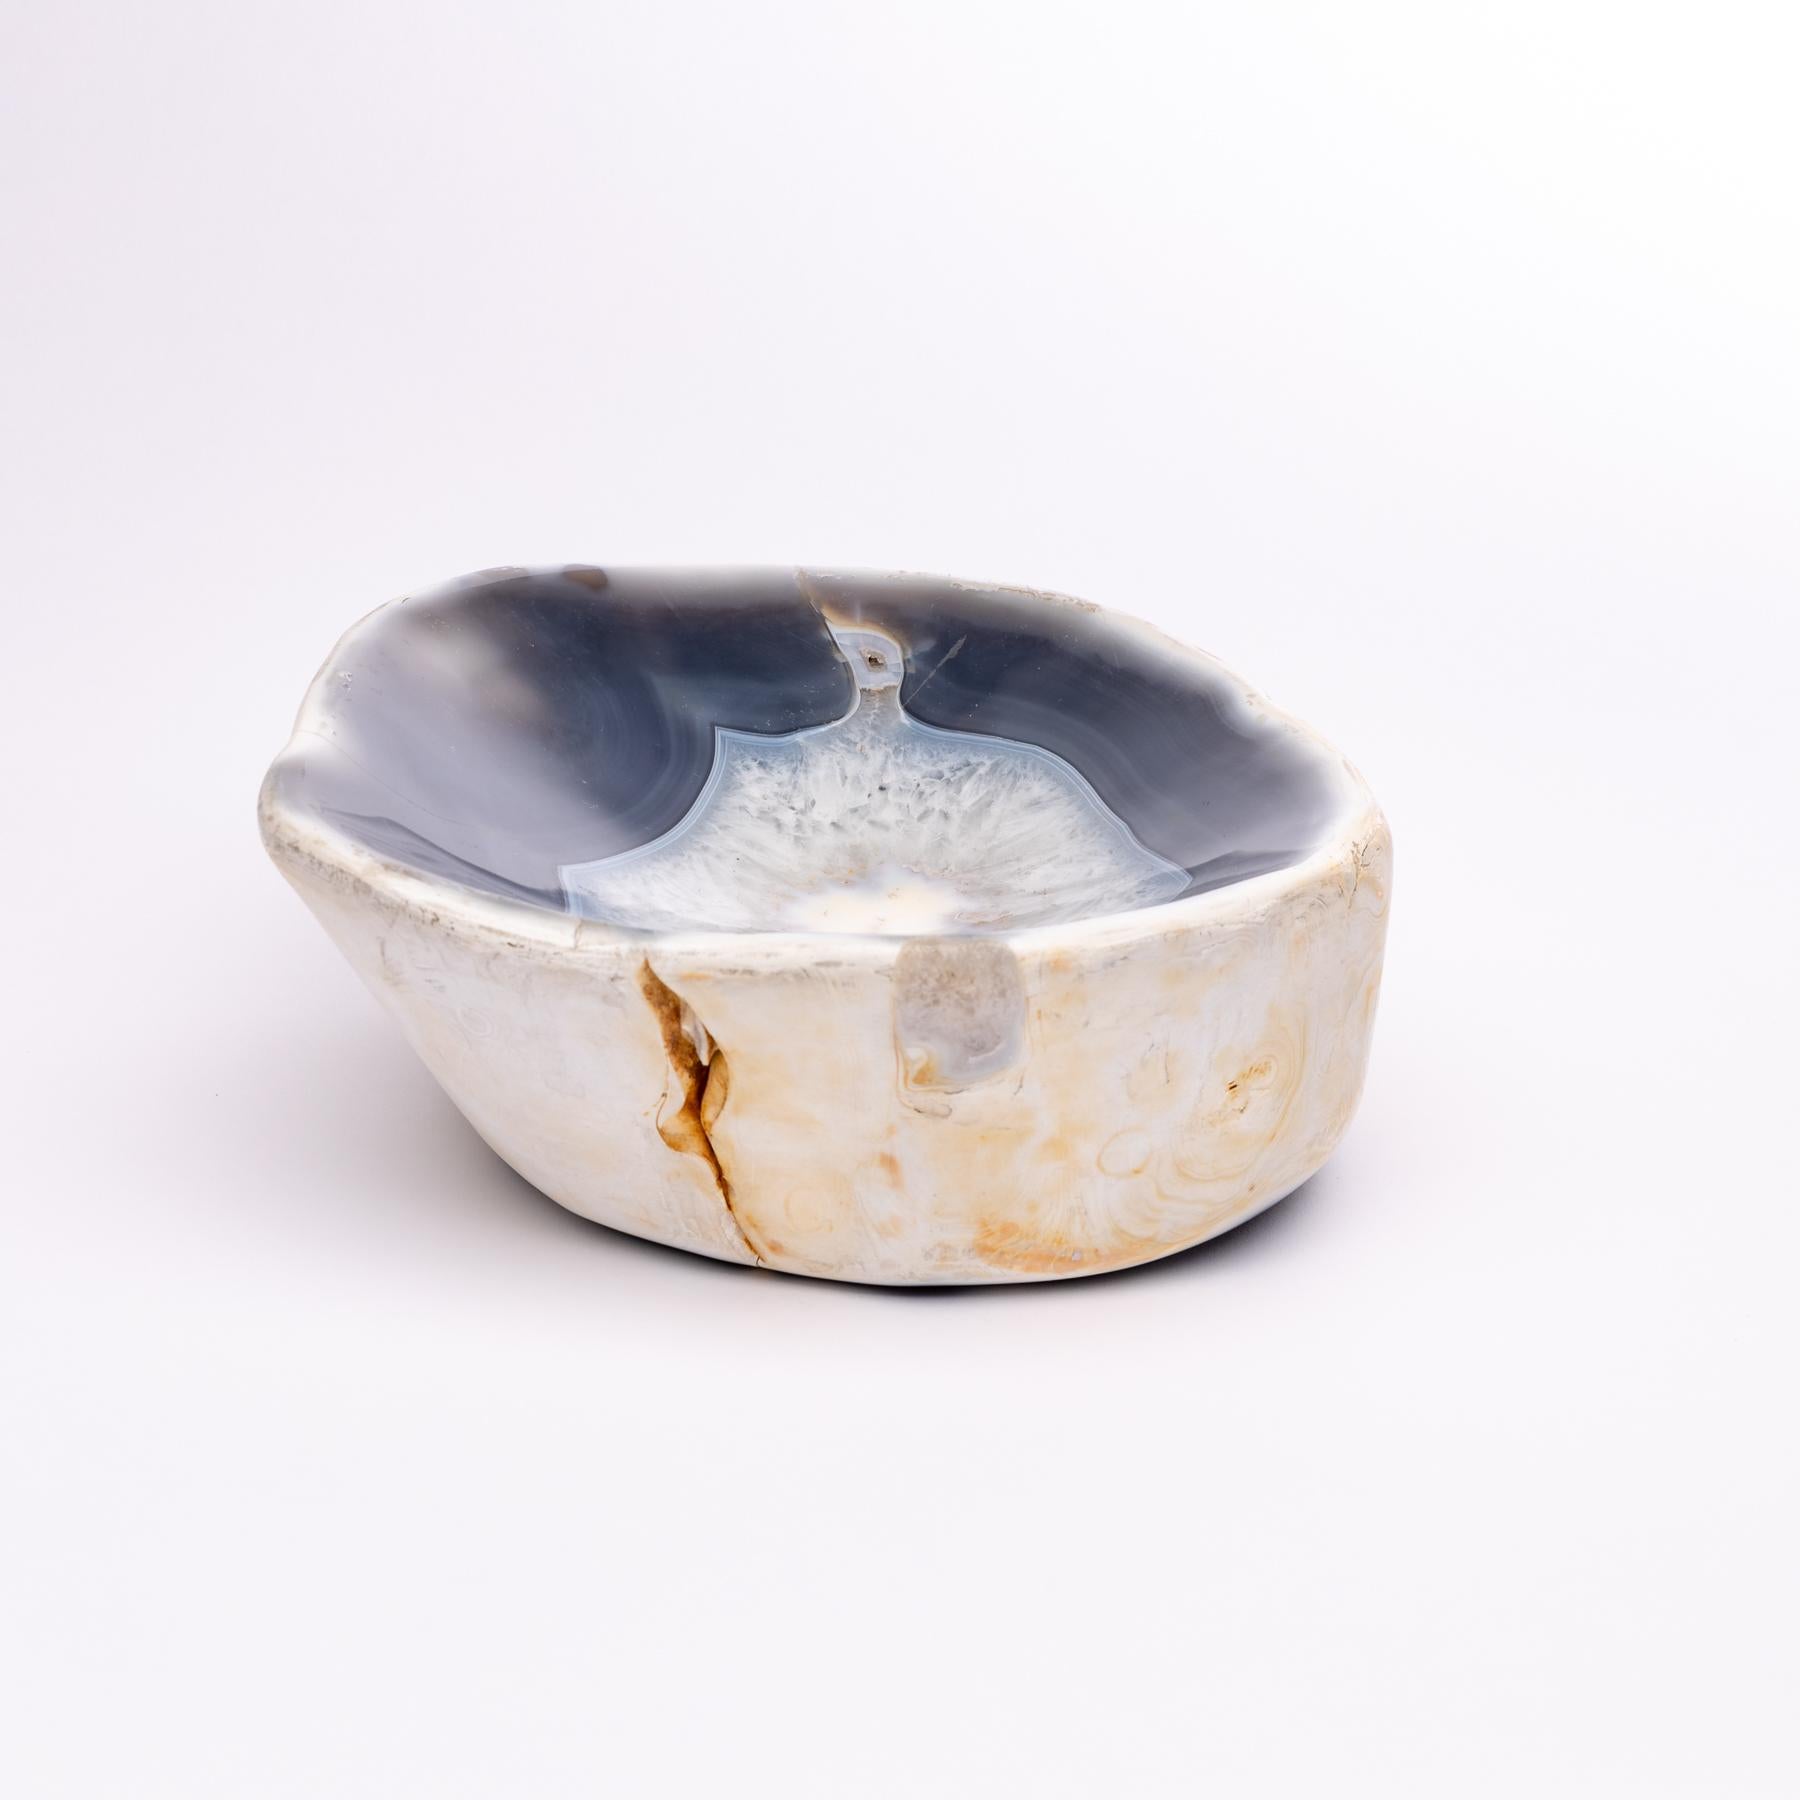 Beautiful one of a kind, blue and white shade agate geode handcrafted bowl from Madagascar.